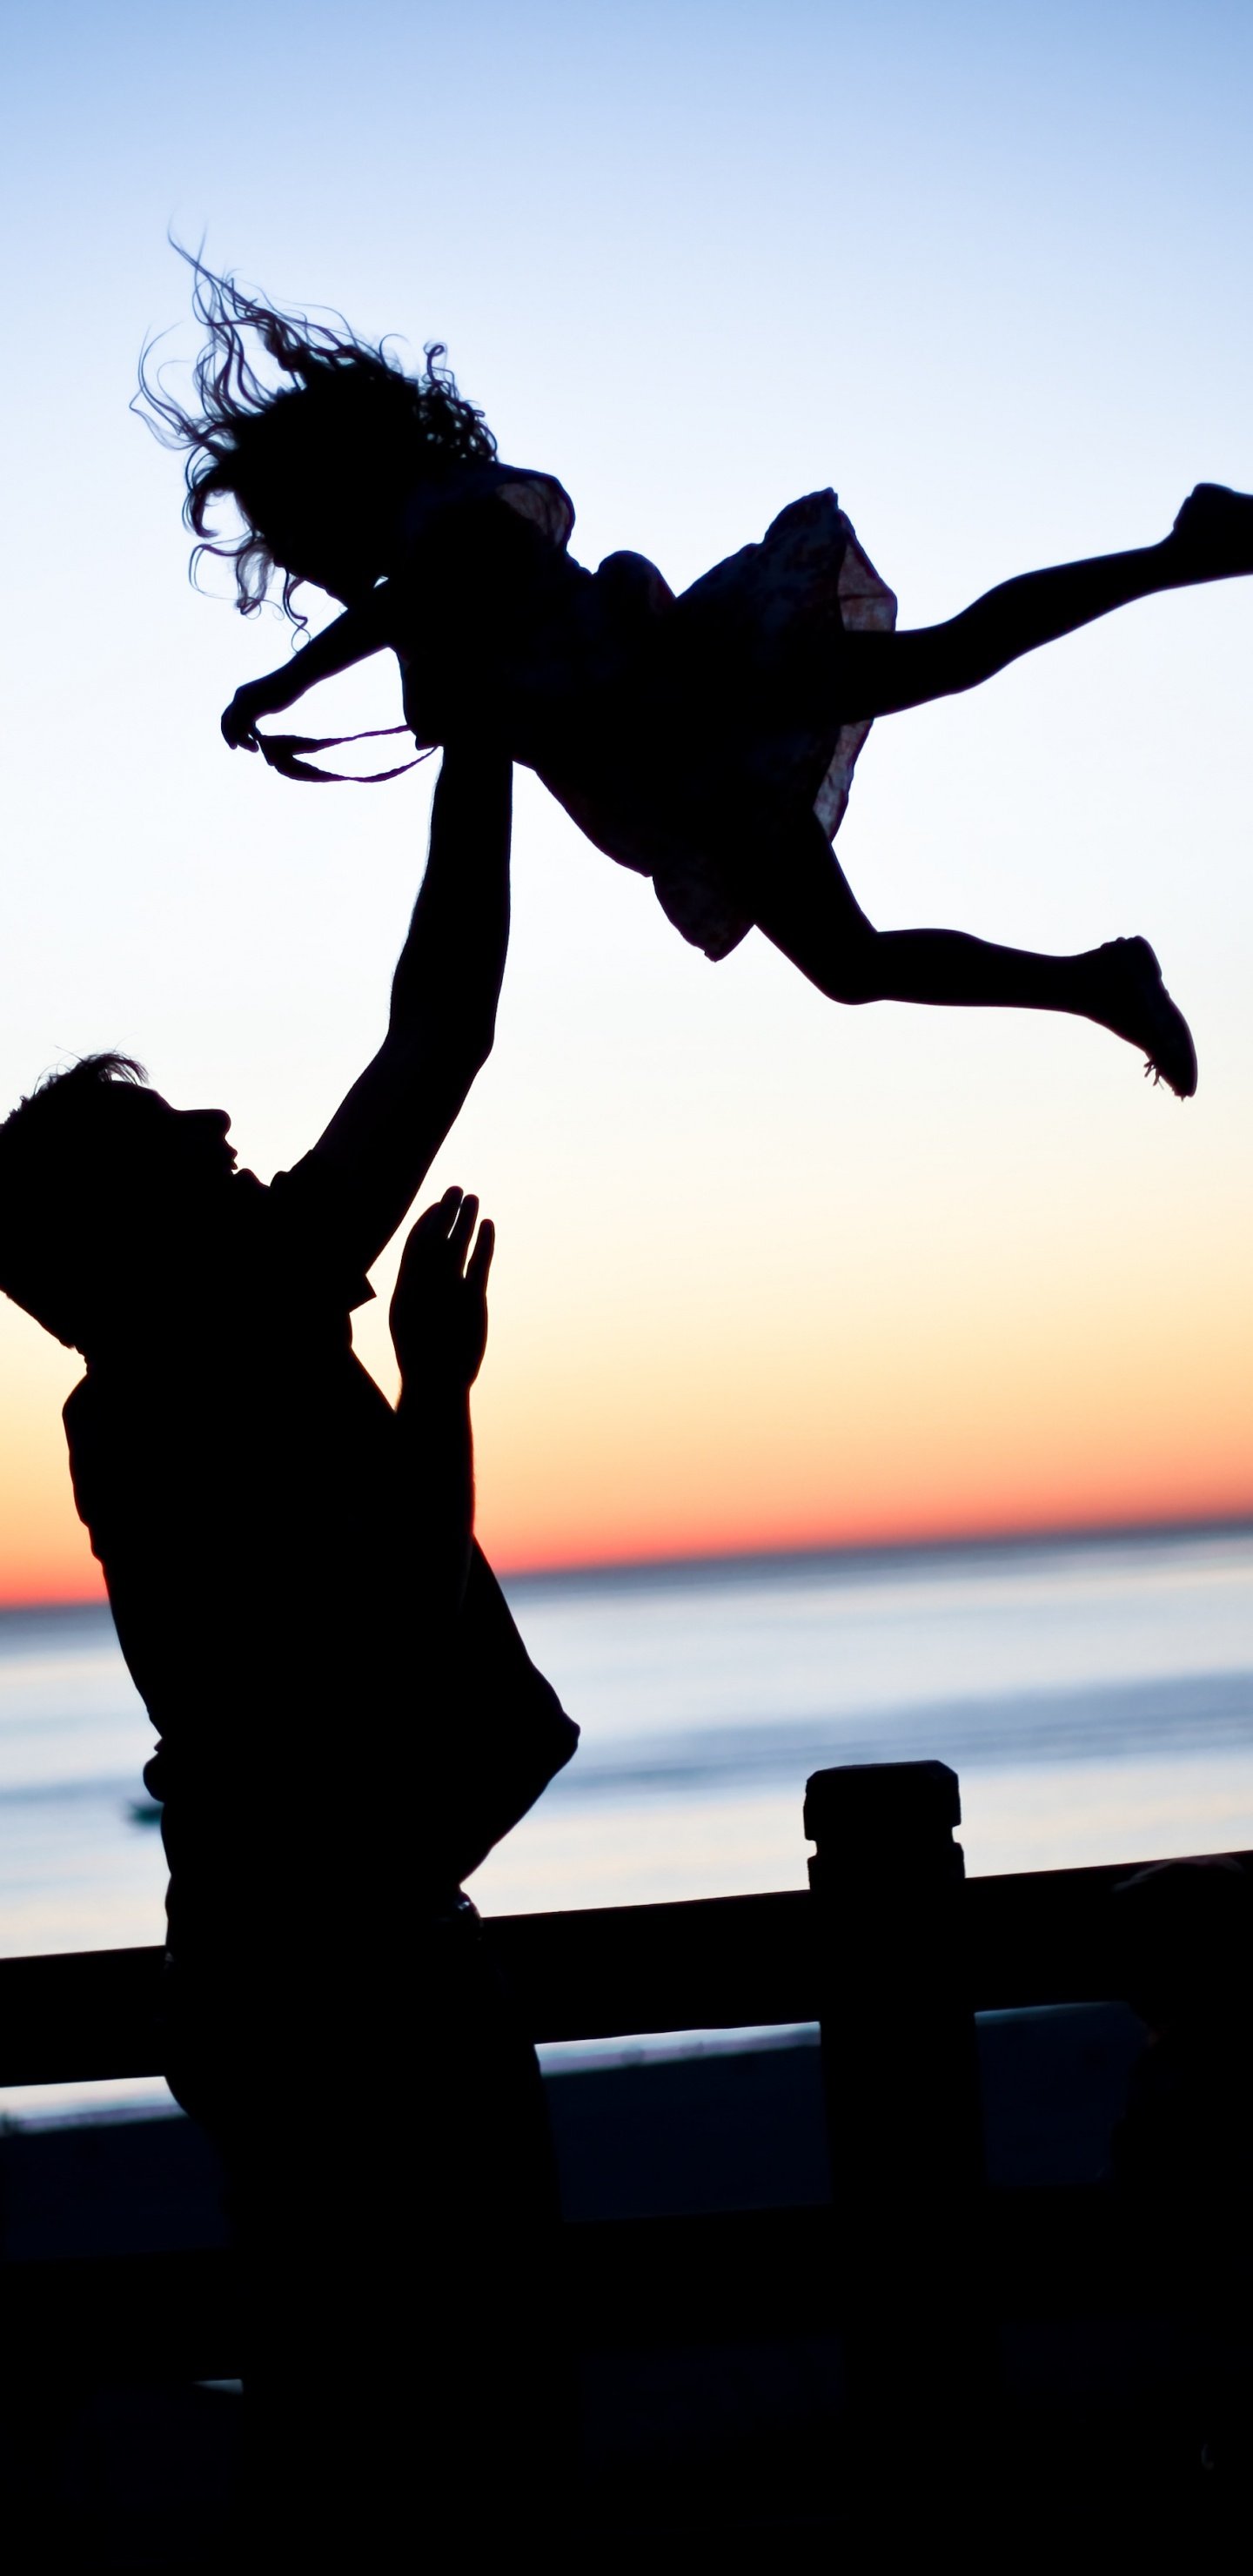 Father, Daughter, Family, People in Nature, Jumping. Wallpaper in 1440x2960 Resolution